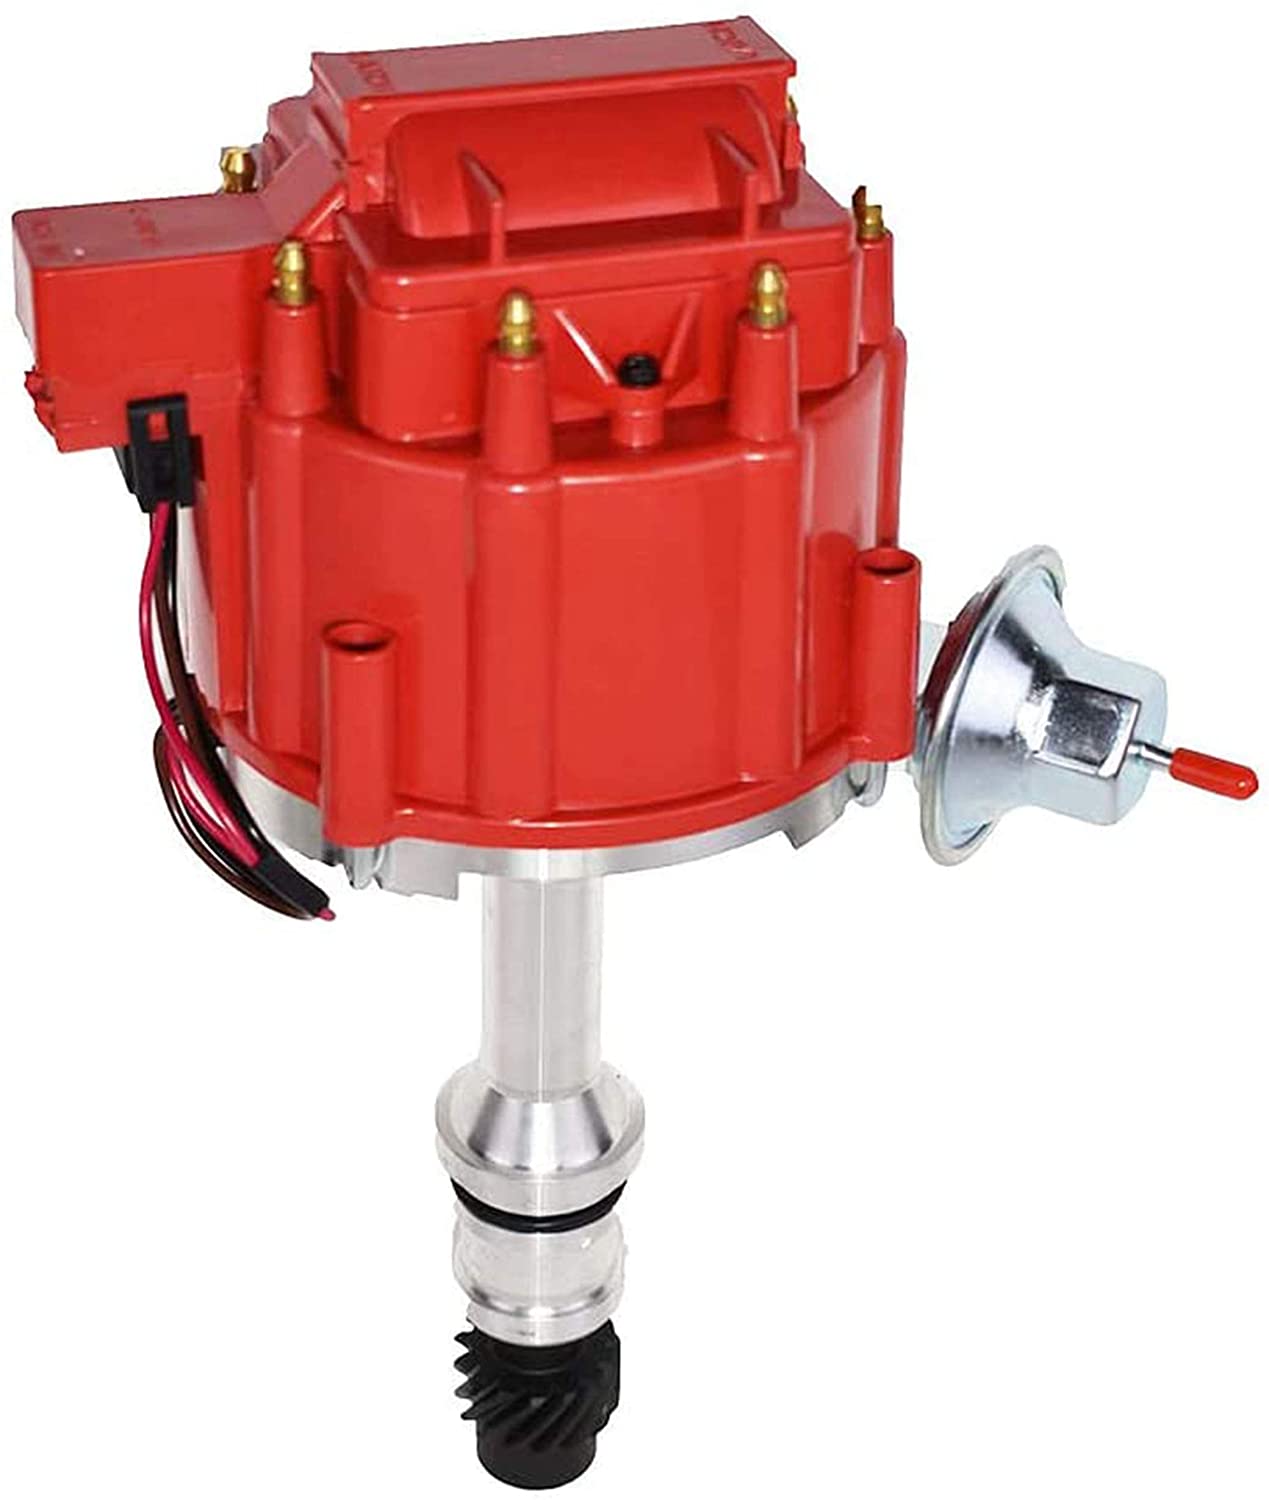 A-Team Performance HEI Complete Distributor 65K Coil Compatible with Oldsmobile V8 Small Block Big Block 260 307 330 350 400 403 425 455 One Wire Installation Red Cap (Red)